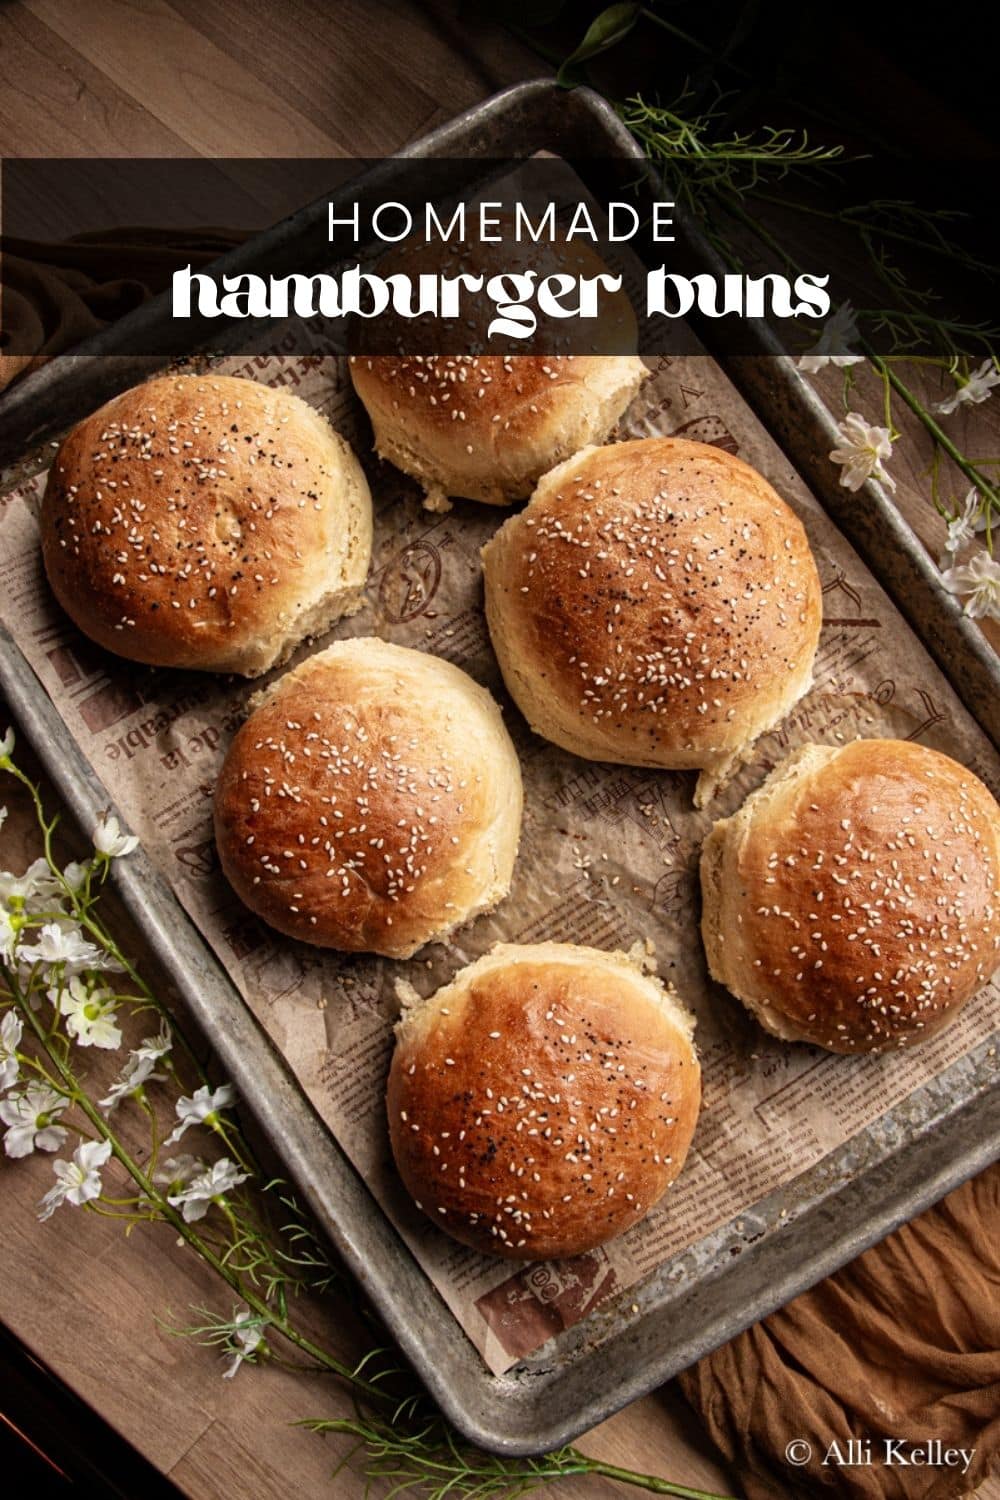 Making homemade hamburger buns is easier than you think! Using just a few pantry staples, you can make soft and fluffy hamburger buns that rival anything in the grocery store. Stuff them with your favorite fillings and enjoy a delicious, homemade meal your family will love!